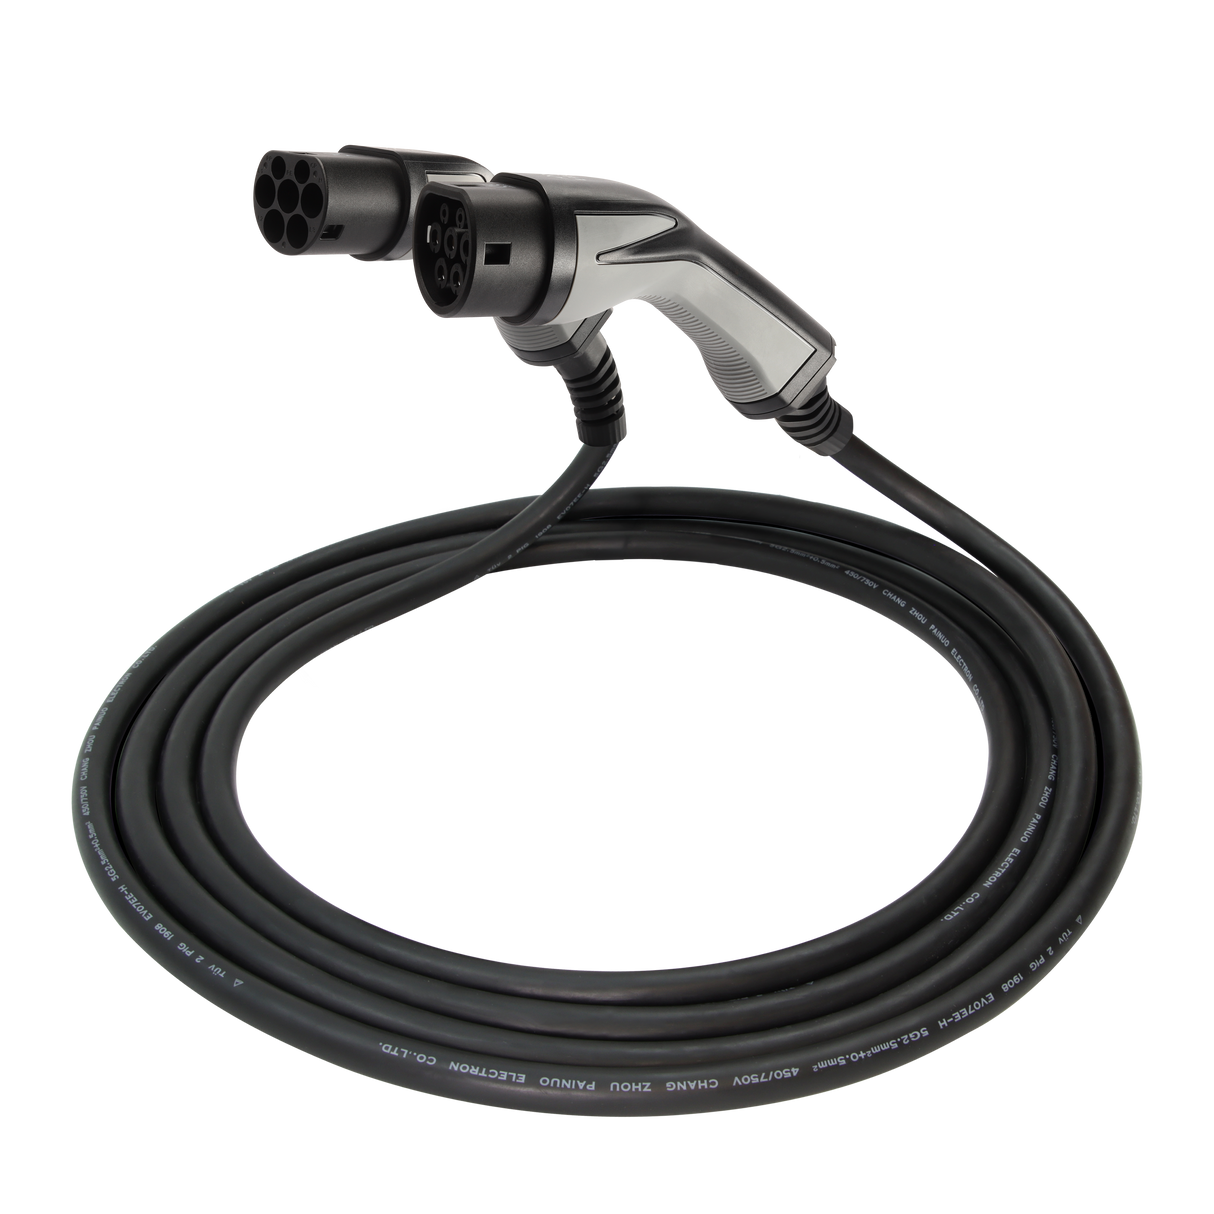 Charging cable Audi A3 - Erock Pro Type 2 - 16A 1 phase (3.7 kW)